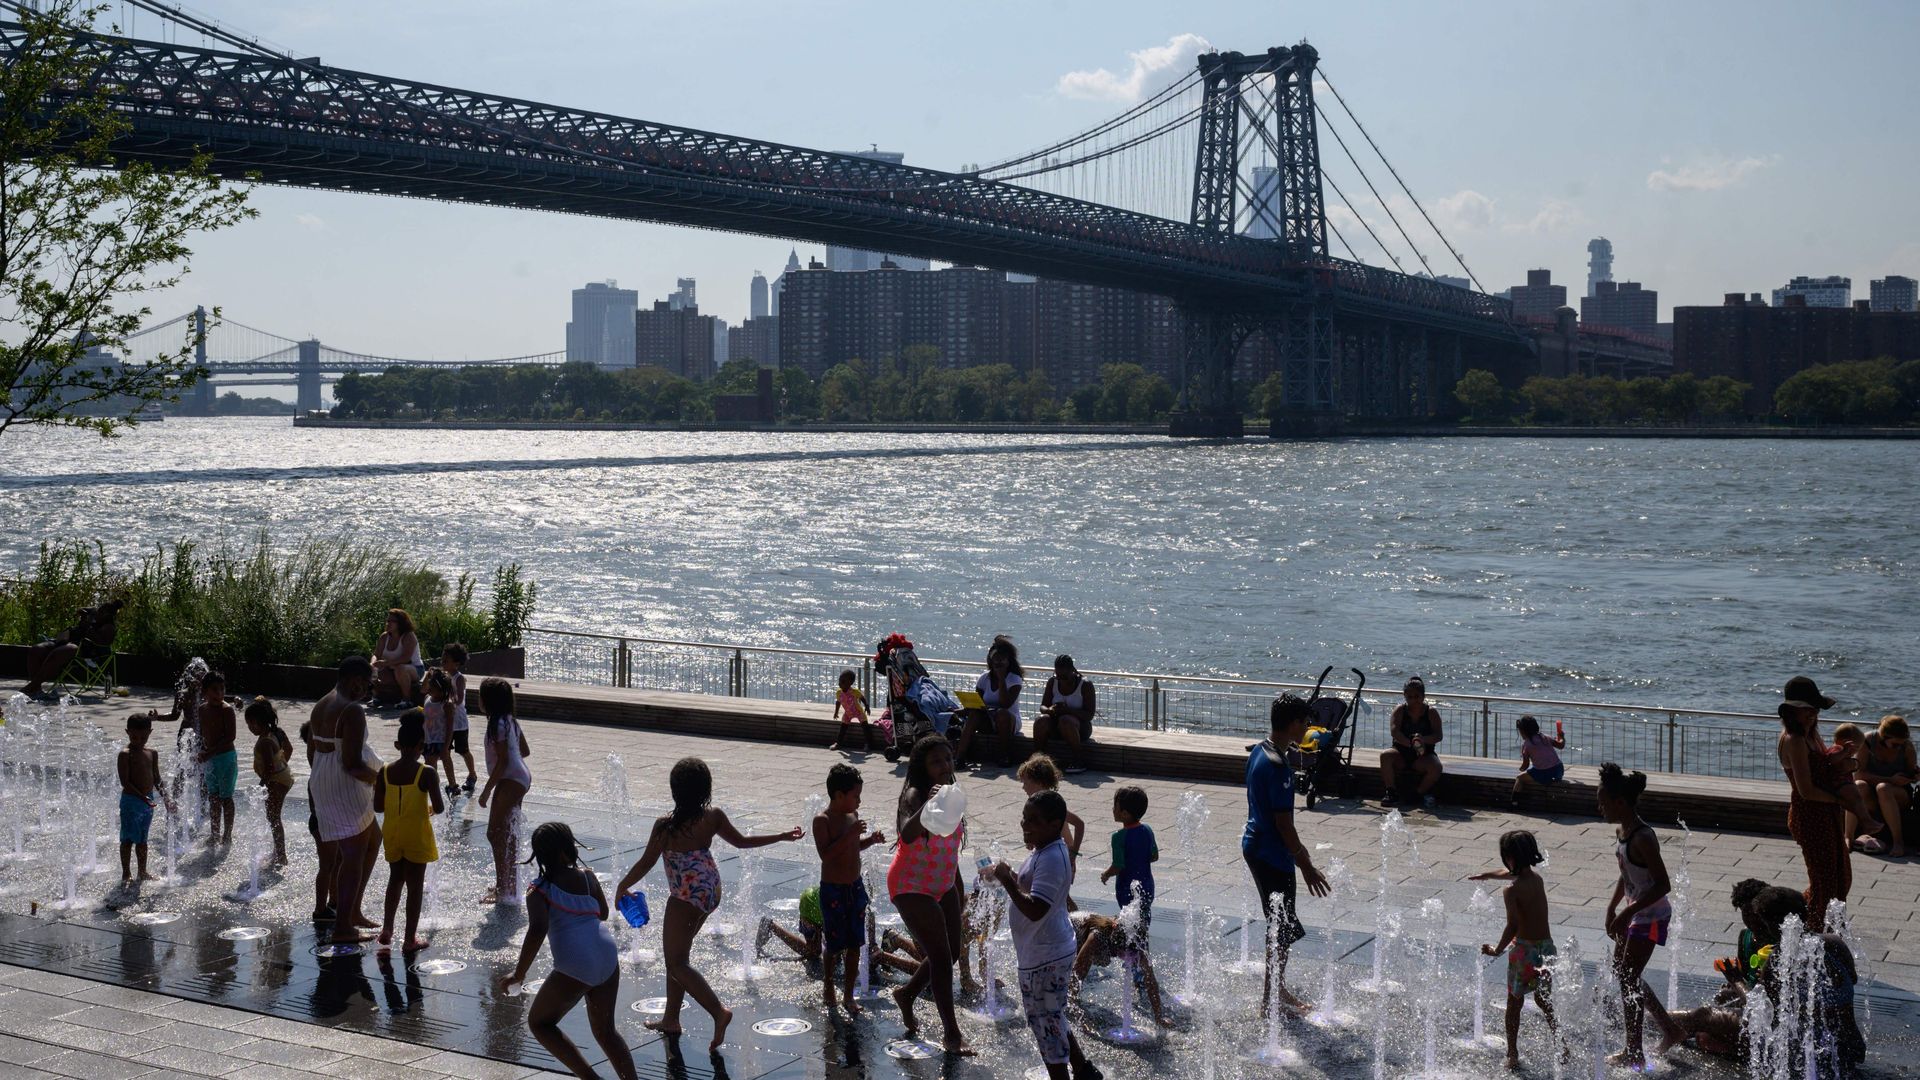 Children play in an outdoor fountain in Brooklyn, NY in August during an excessive heat warning for the city.